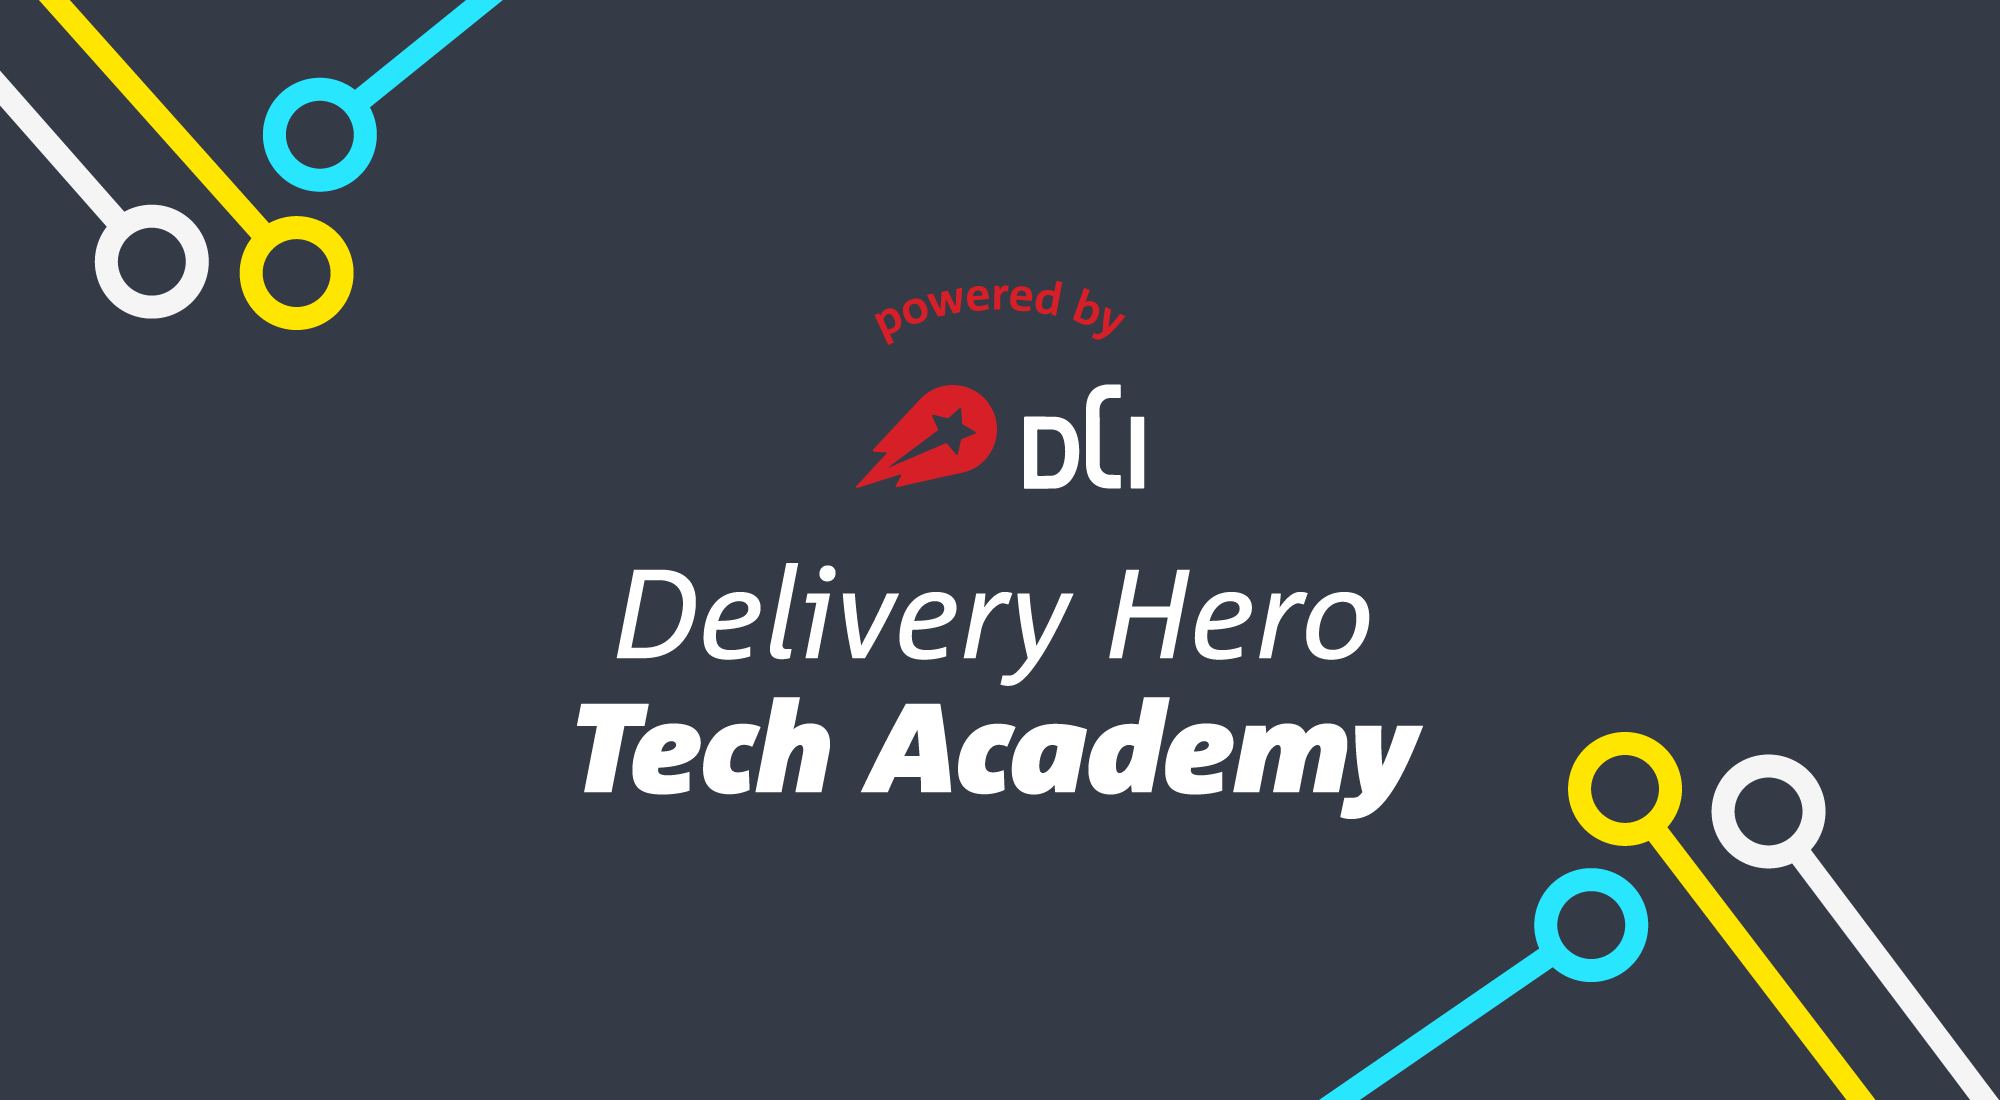 Launching the Delivery Hero Tech Academy to promote diversity in the technology industry